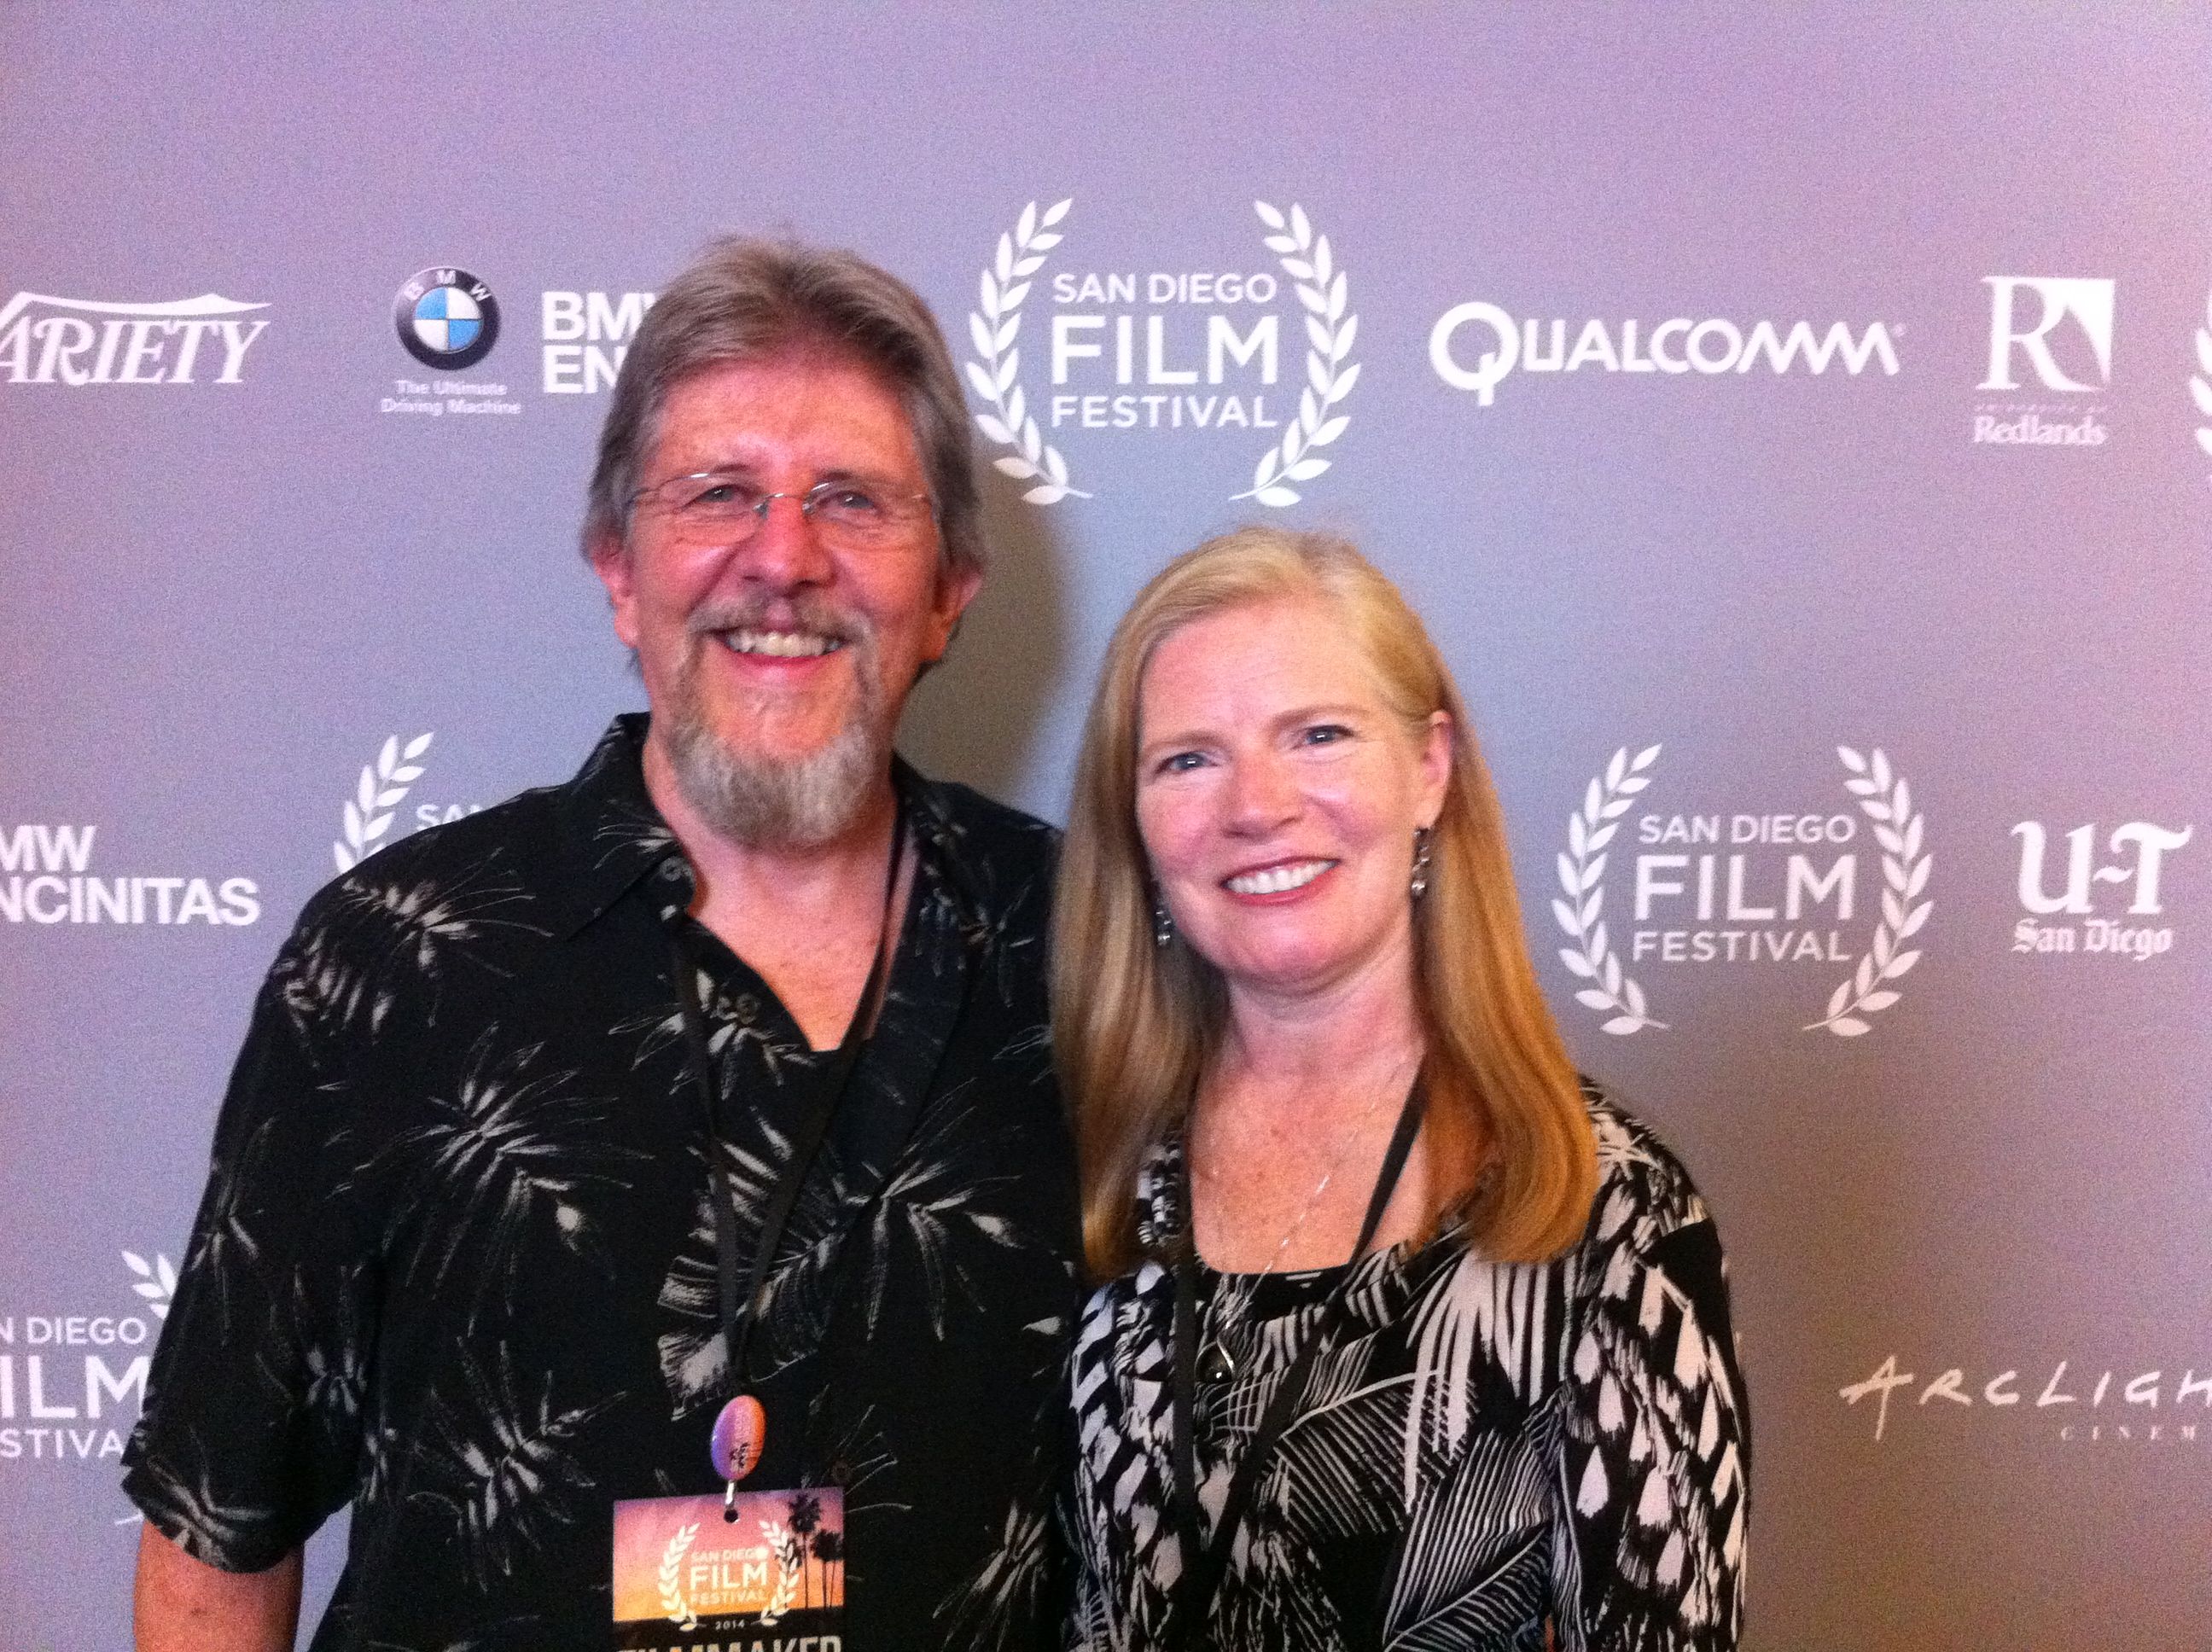 At the San Diego Film Festival September 27, 2014 with Mark Krigbaum and Angela Murphy